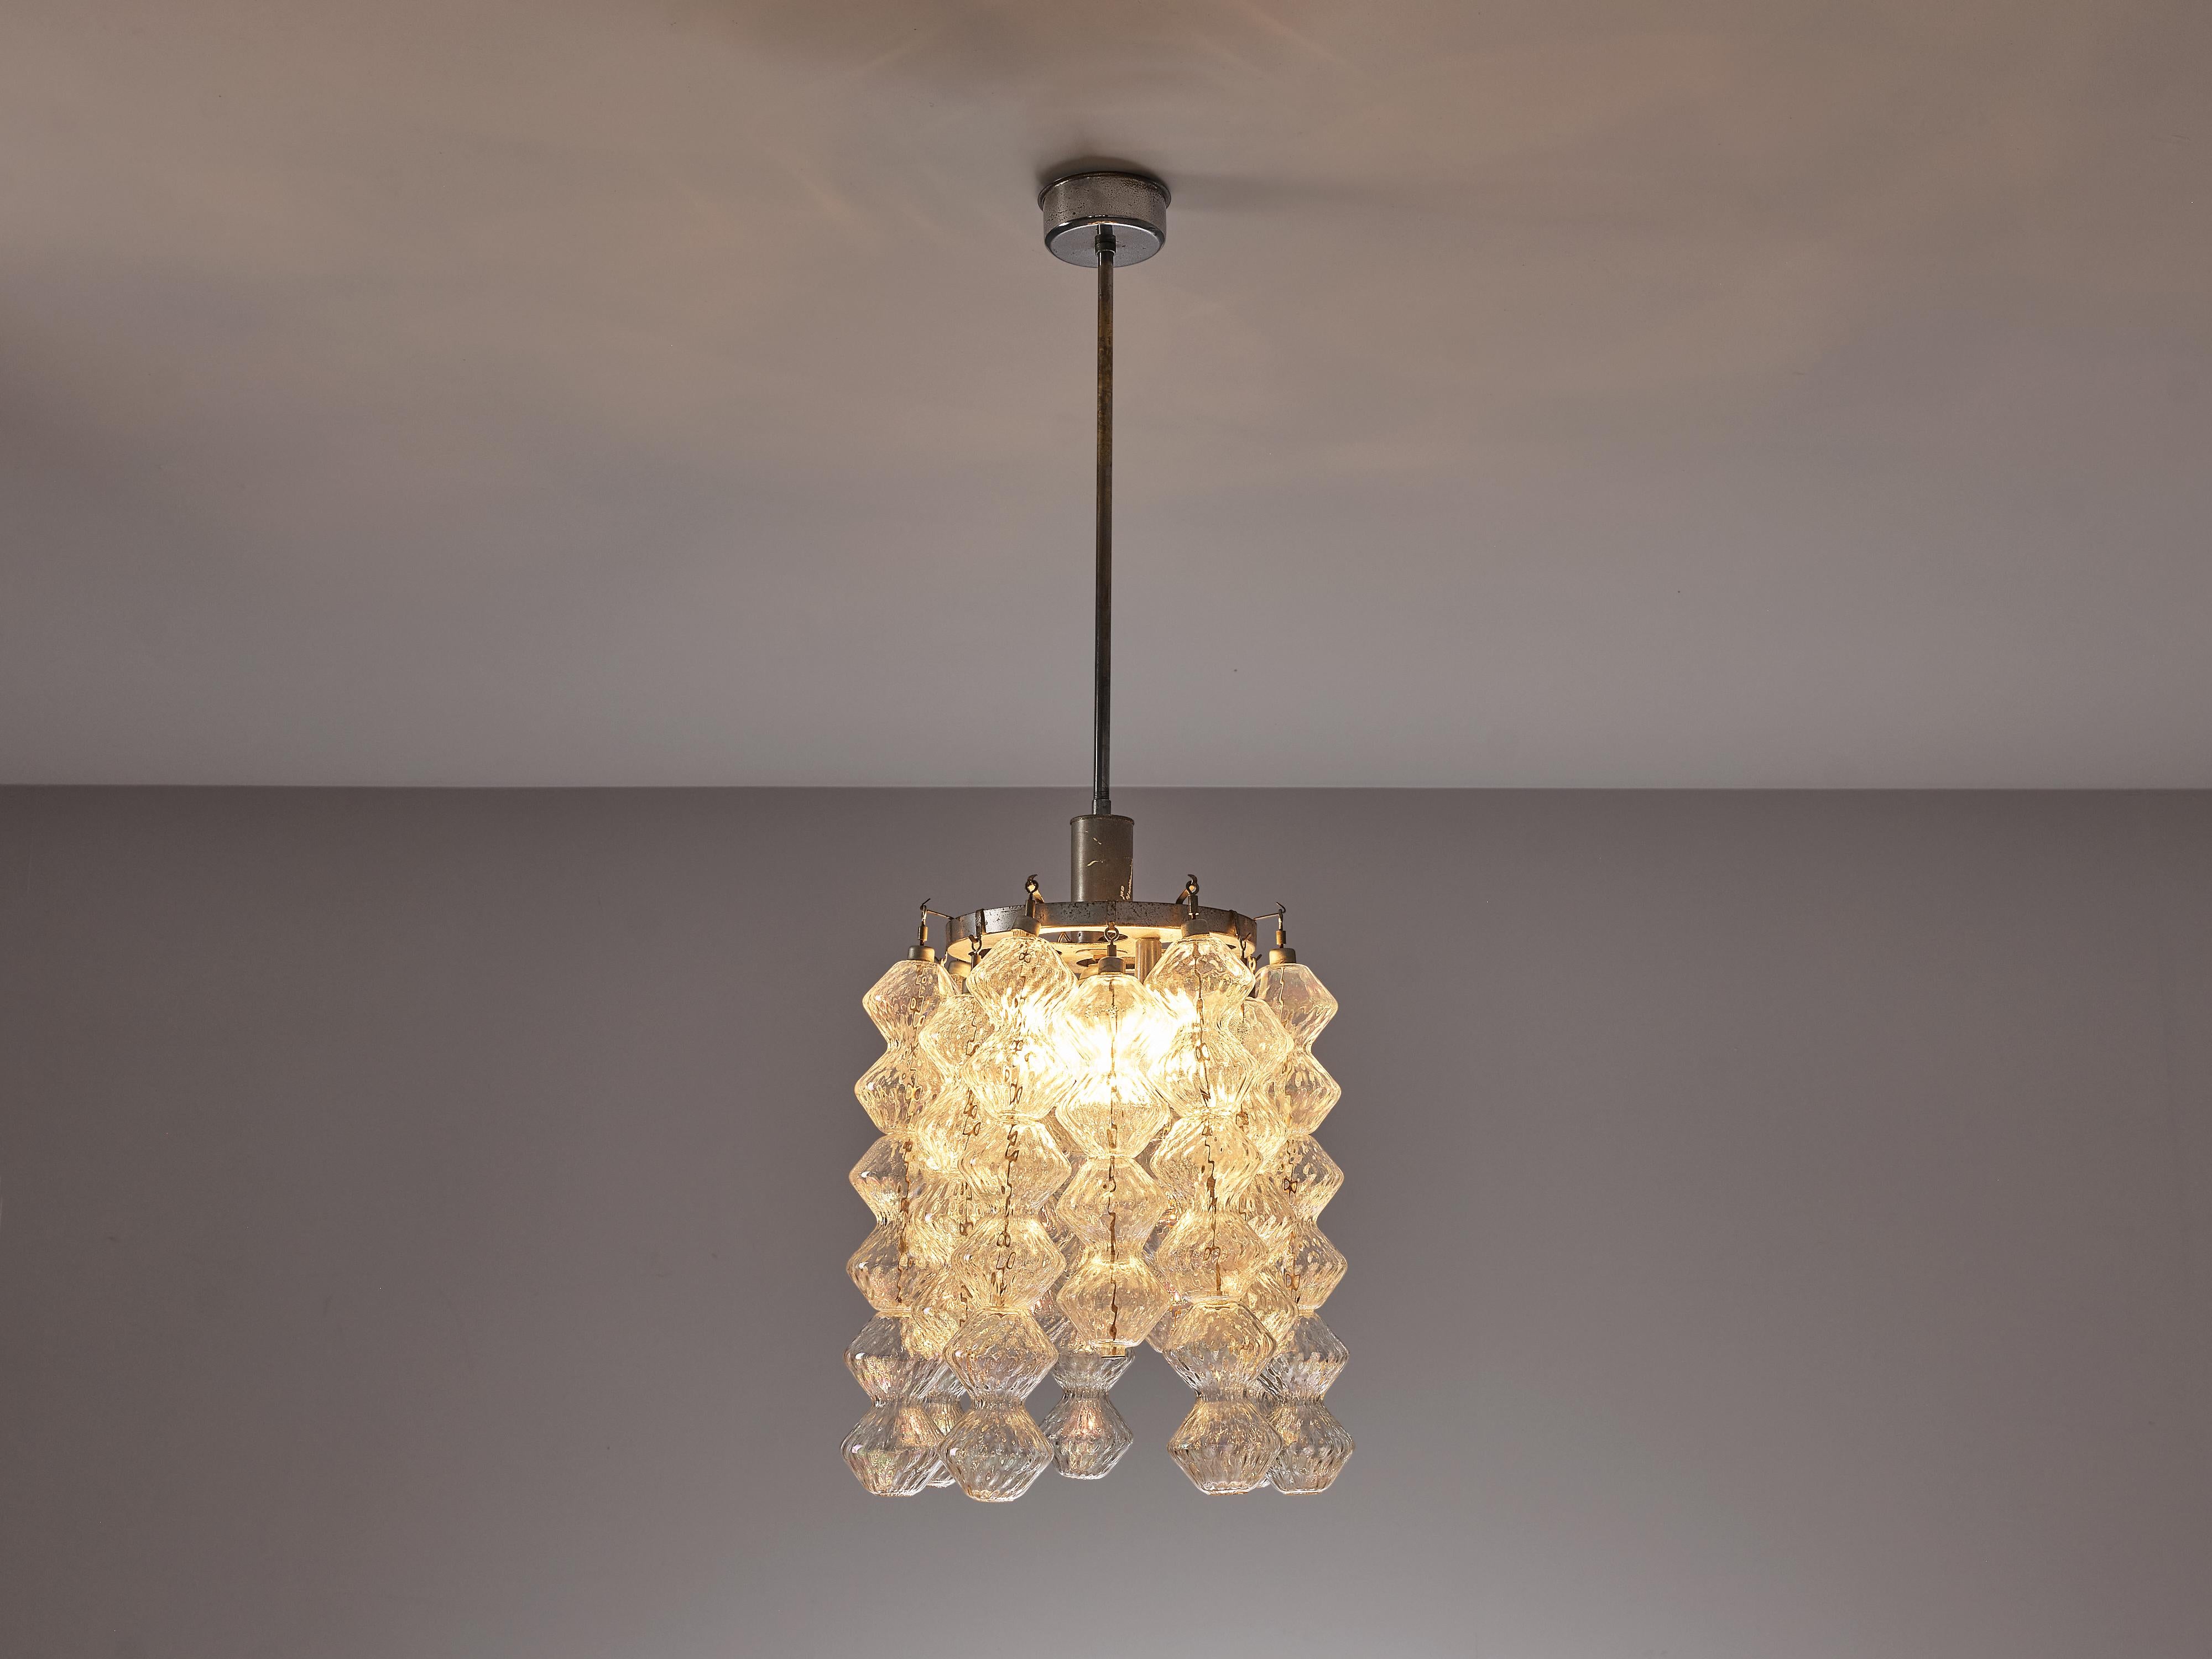 Chandelier, chrome, glass, Europe, 1960s 

This beautiful chandelier is decorated with elongated textured glass spheres that absorb the light. This results in an alluring partition of light adding a lovely atmosphere in the room. The chrome of the